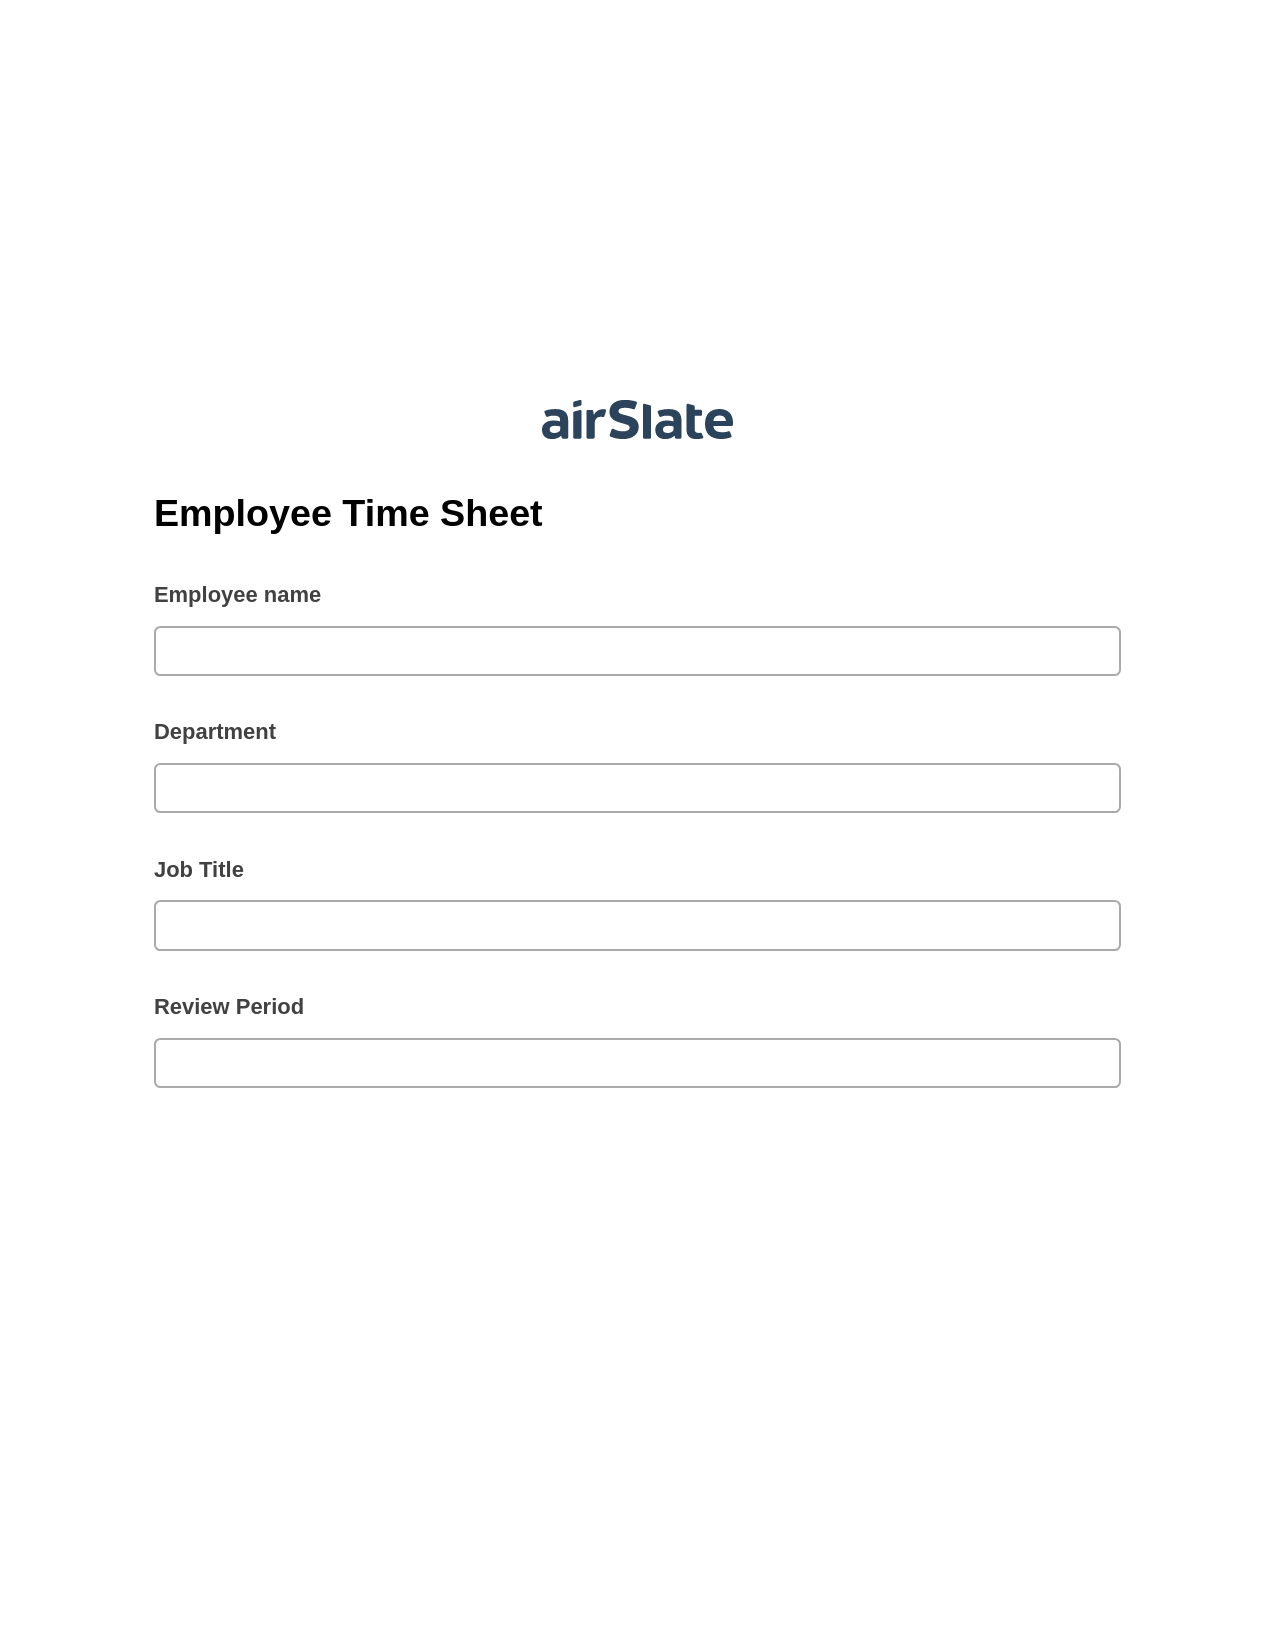 Multirole Employee Time Sheet Pre-fill from MS Dynamics 365 Records, Create Salesforce Records Bot, Export to NetSuite Bot